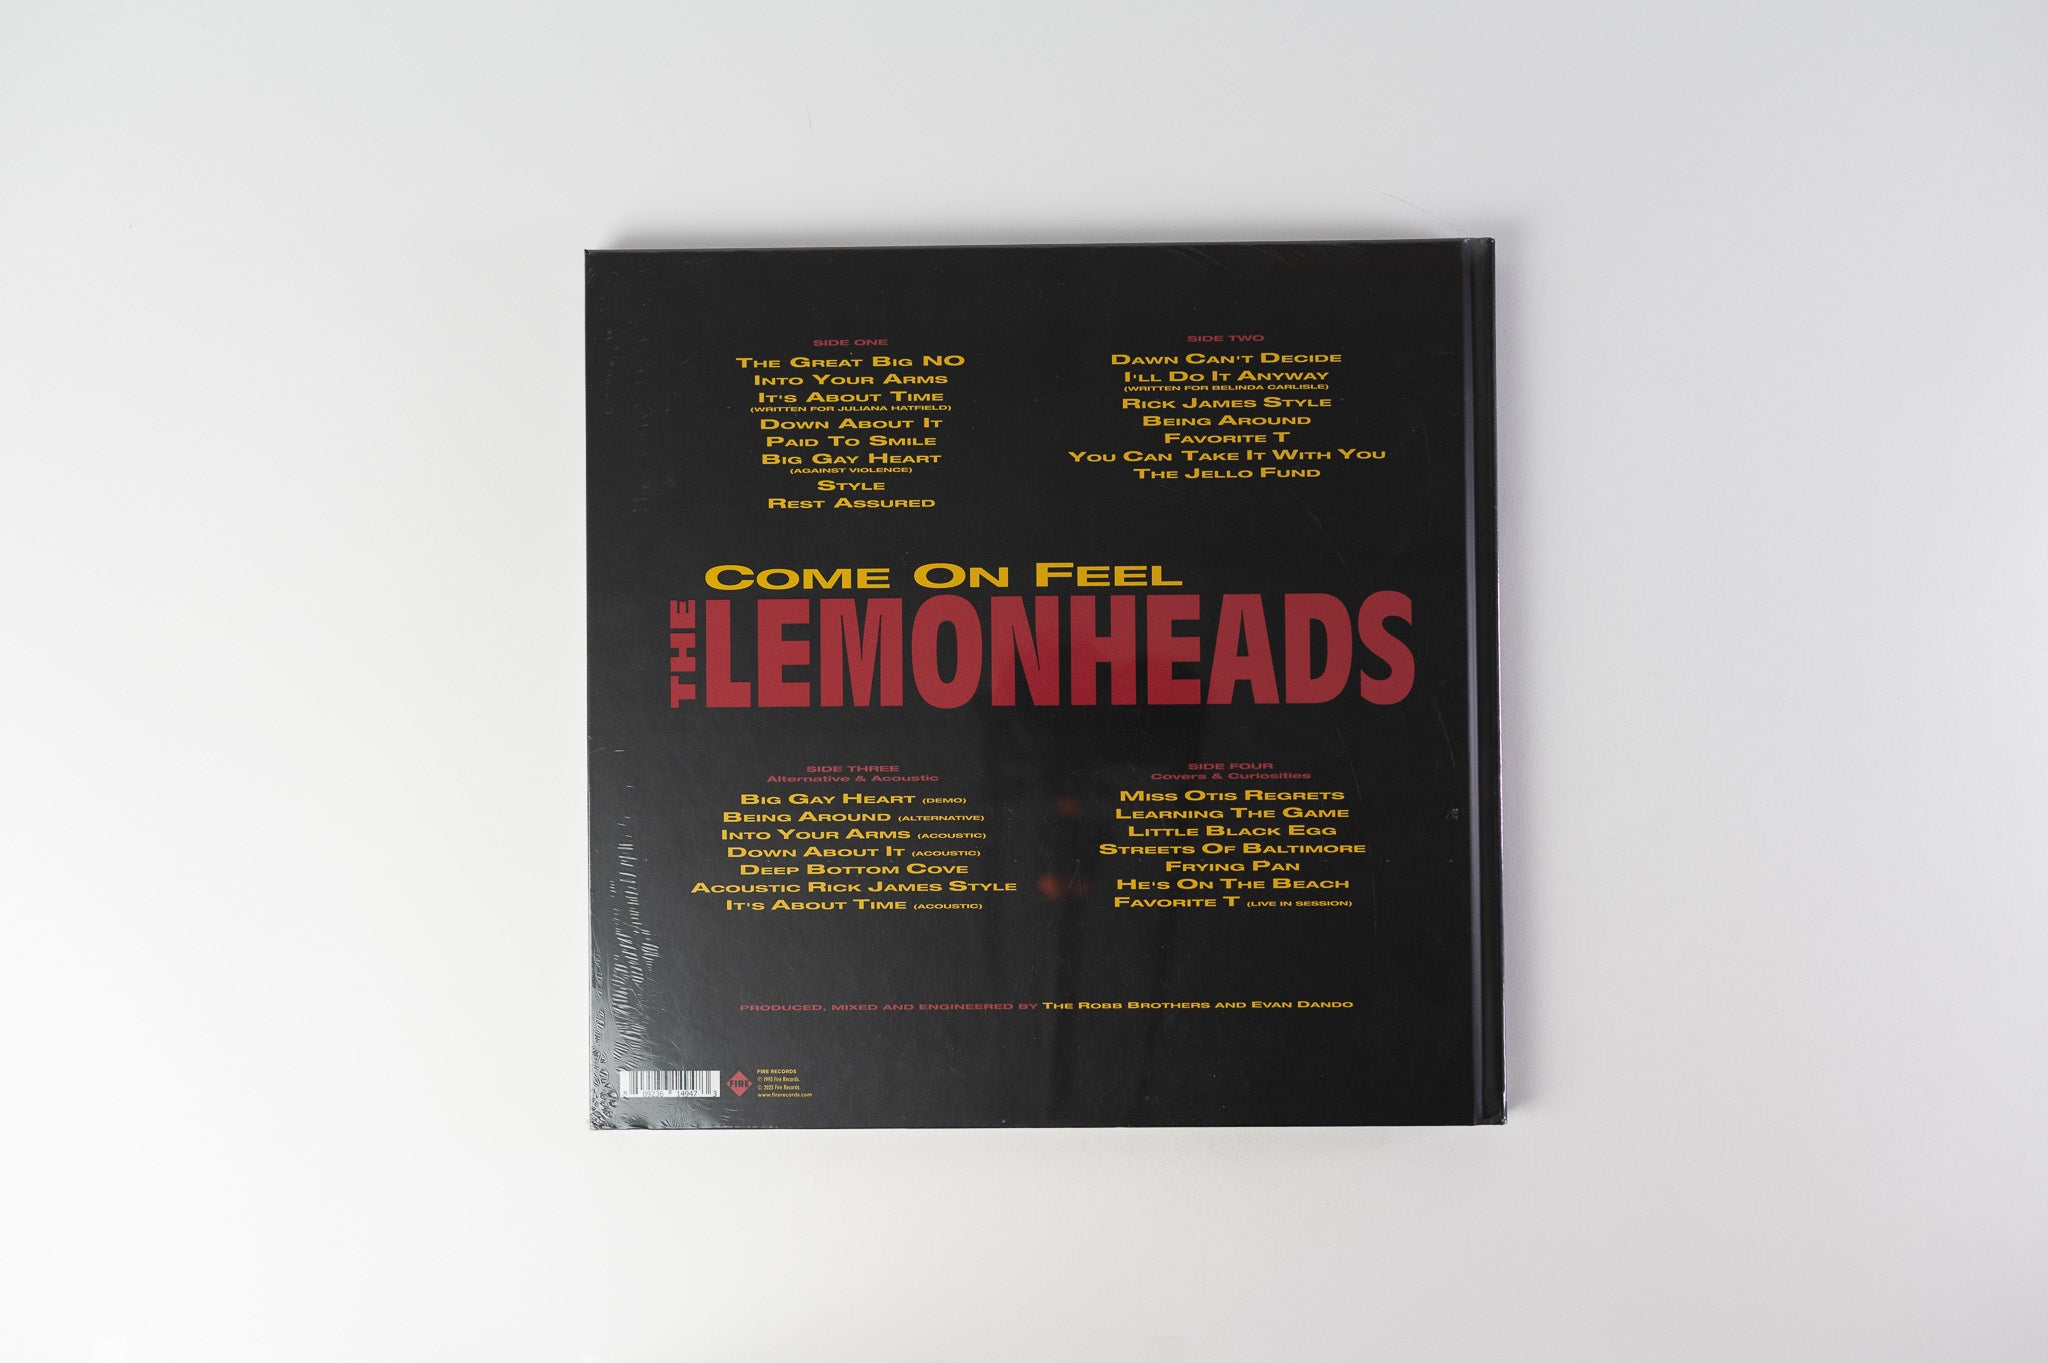 The Lemonheads - Come On Feel The Lemonheads on Fire Records Deluxe 30th Anniversary Bookback Compilation Sealed